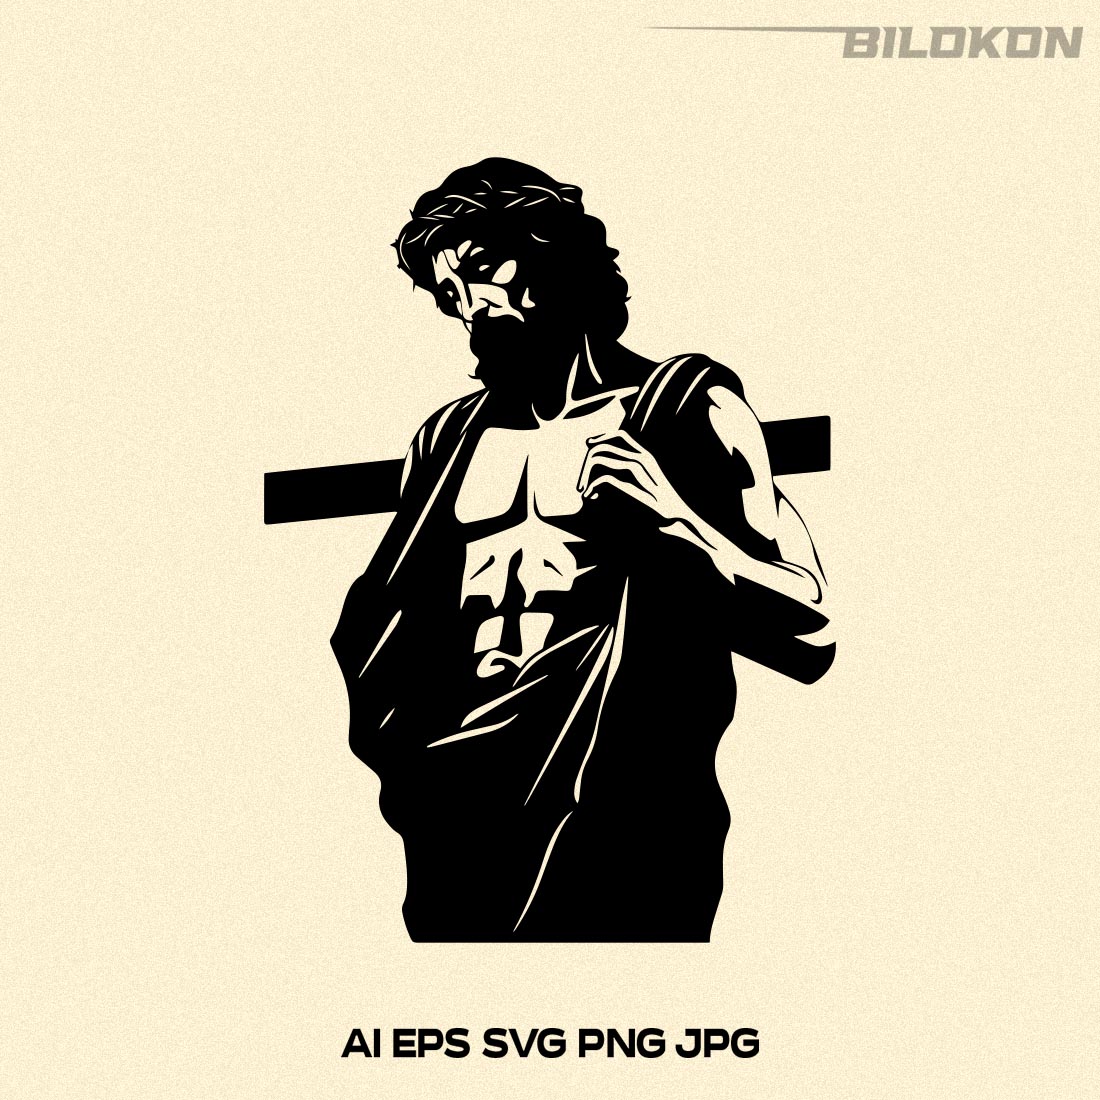 Jesus on the cross, prays to God, SVG Vector preview image.